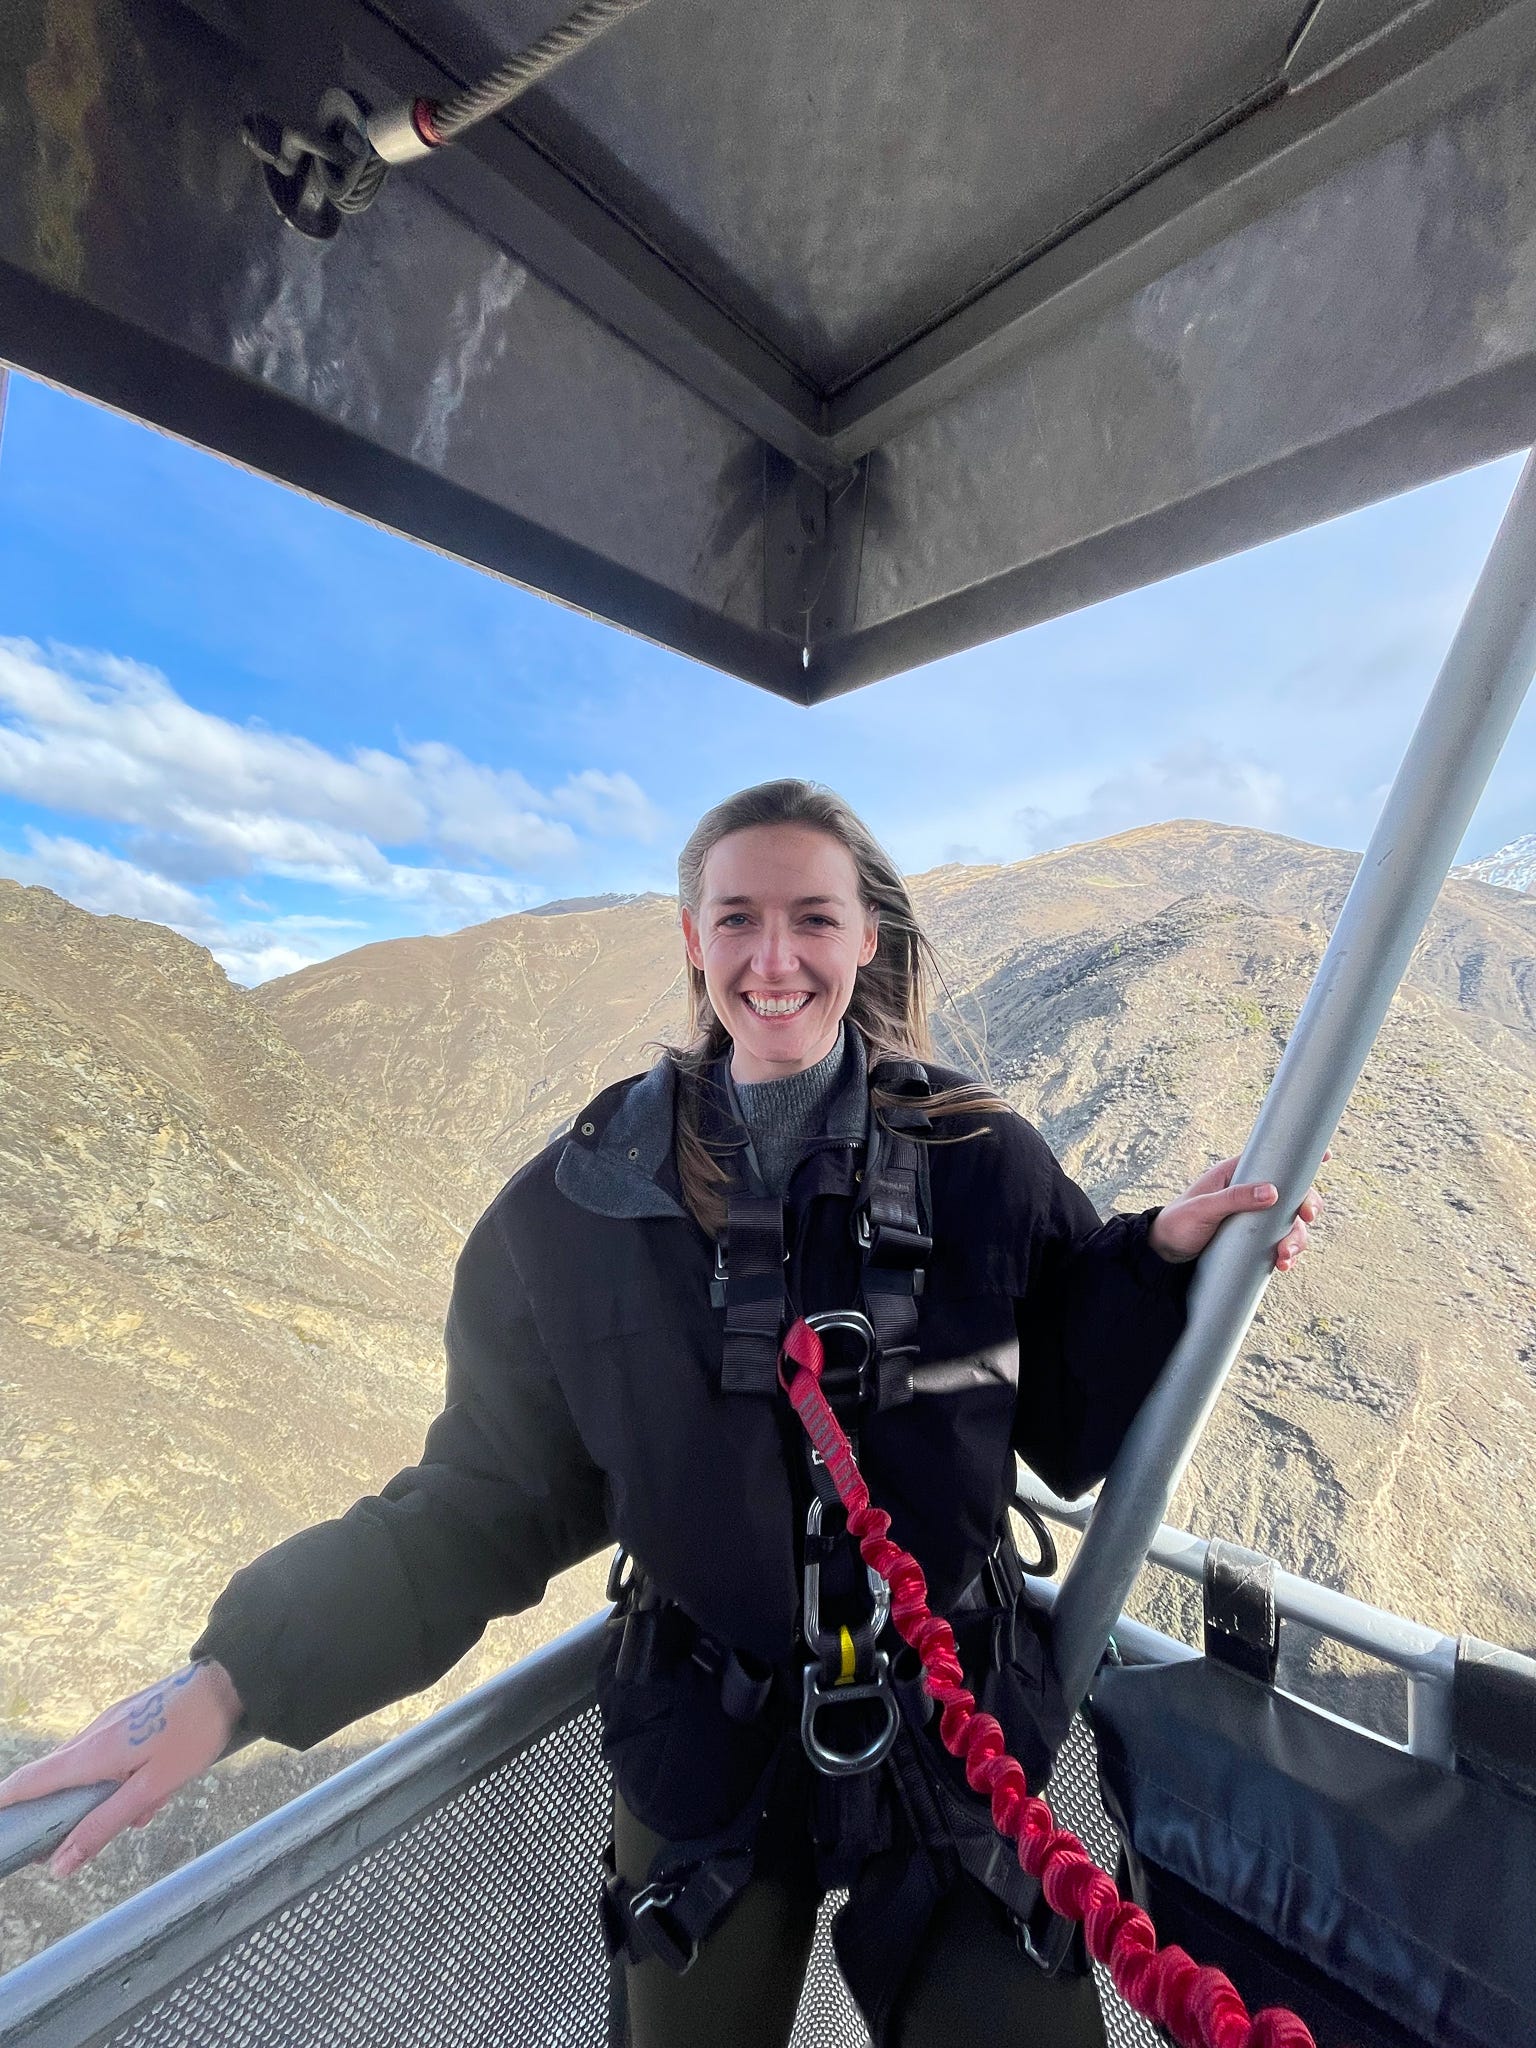 <p>When it comes to traveling, I'm typically willing to sacrifice comfort for the experience. For example, I'd much rather pay money to go skydiving or <a href="https://www.businessinsider.com/mistakes-tips-bungee-jumping-new-zealand-2022-9">bungee jumping</a> than stay in a <a href="https://www.businessinsider.com/luxury-five-star-hotels-most-surprising-things-2022-1">five-star hotel</a>.</p><p>And $10,000 could fund a lot of life experiences. The cost of my business-class seat on the same route could buy another vacation, pay for multiple months of rent, or be used as a down payment on a <a href="https://www.businessinsider.com/best-cross-country-road-trip-pit-stops-2022-1" rel="noopener">new car that could take me on adventures across the US</a>. </p><p>I could also replicate my <a href="https://www.businessinsider.com/australia-new-zealand-mistakes-made-solo-travel-2023-1">entire 21-day trip to New Zealand and Australia</a> for less than the cost of a round-trip ticket to New Zealand since the trip cost closer to $9,000. </p><p>While I loved the business-class experience, I'd trade it in a heartbeat to go <a href="https://www.businessinsider.com/great-barrier-reef-rum-runner-hostel-sailboat-review-photos-2022-10">diving in the Great Barrier Reef again</a>, stay in more <a href="https://www.businessinsider.com/magical-tiny-home-new-zealand-photos-2022-11">magical tiny homes</a>, and continue exploring the two epic countries. </p>